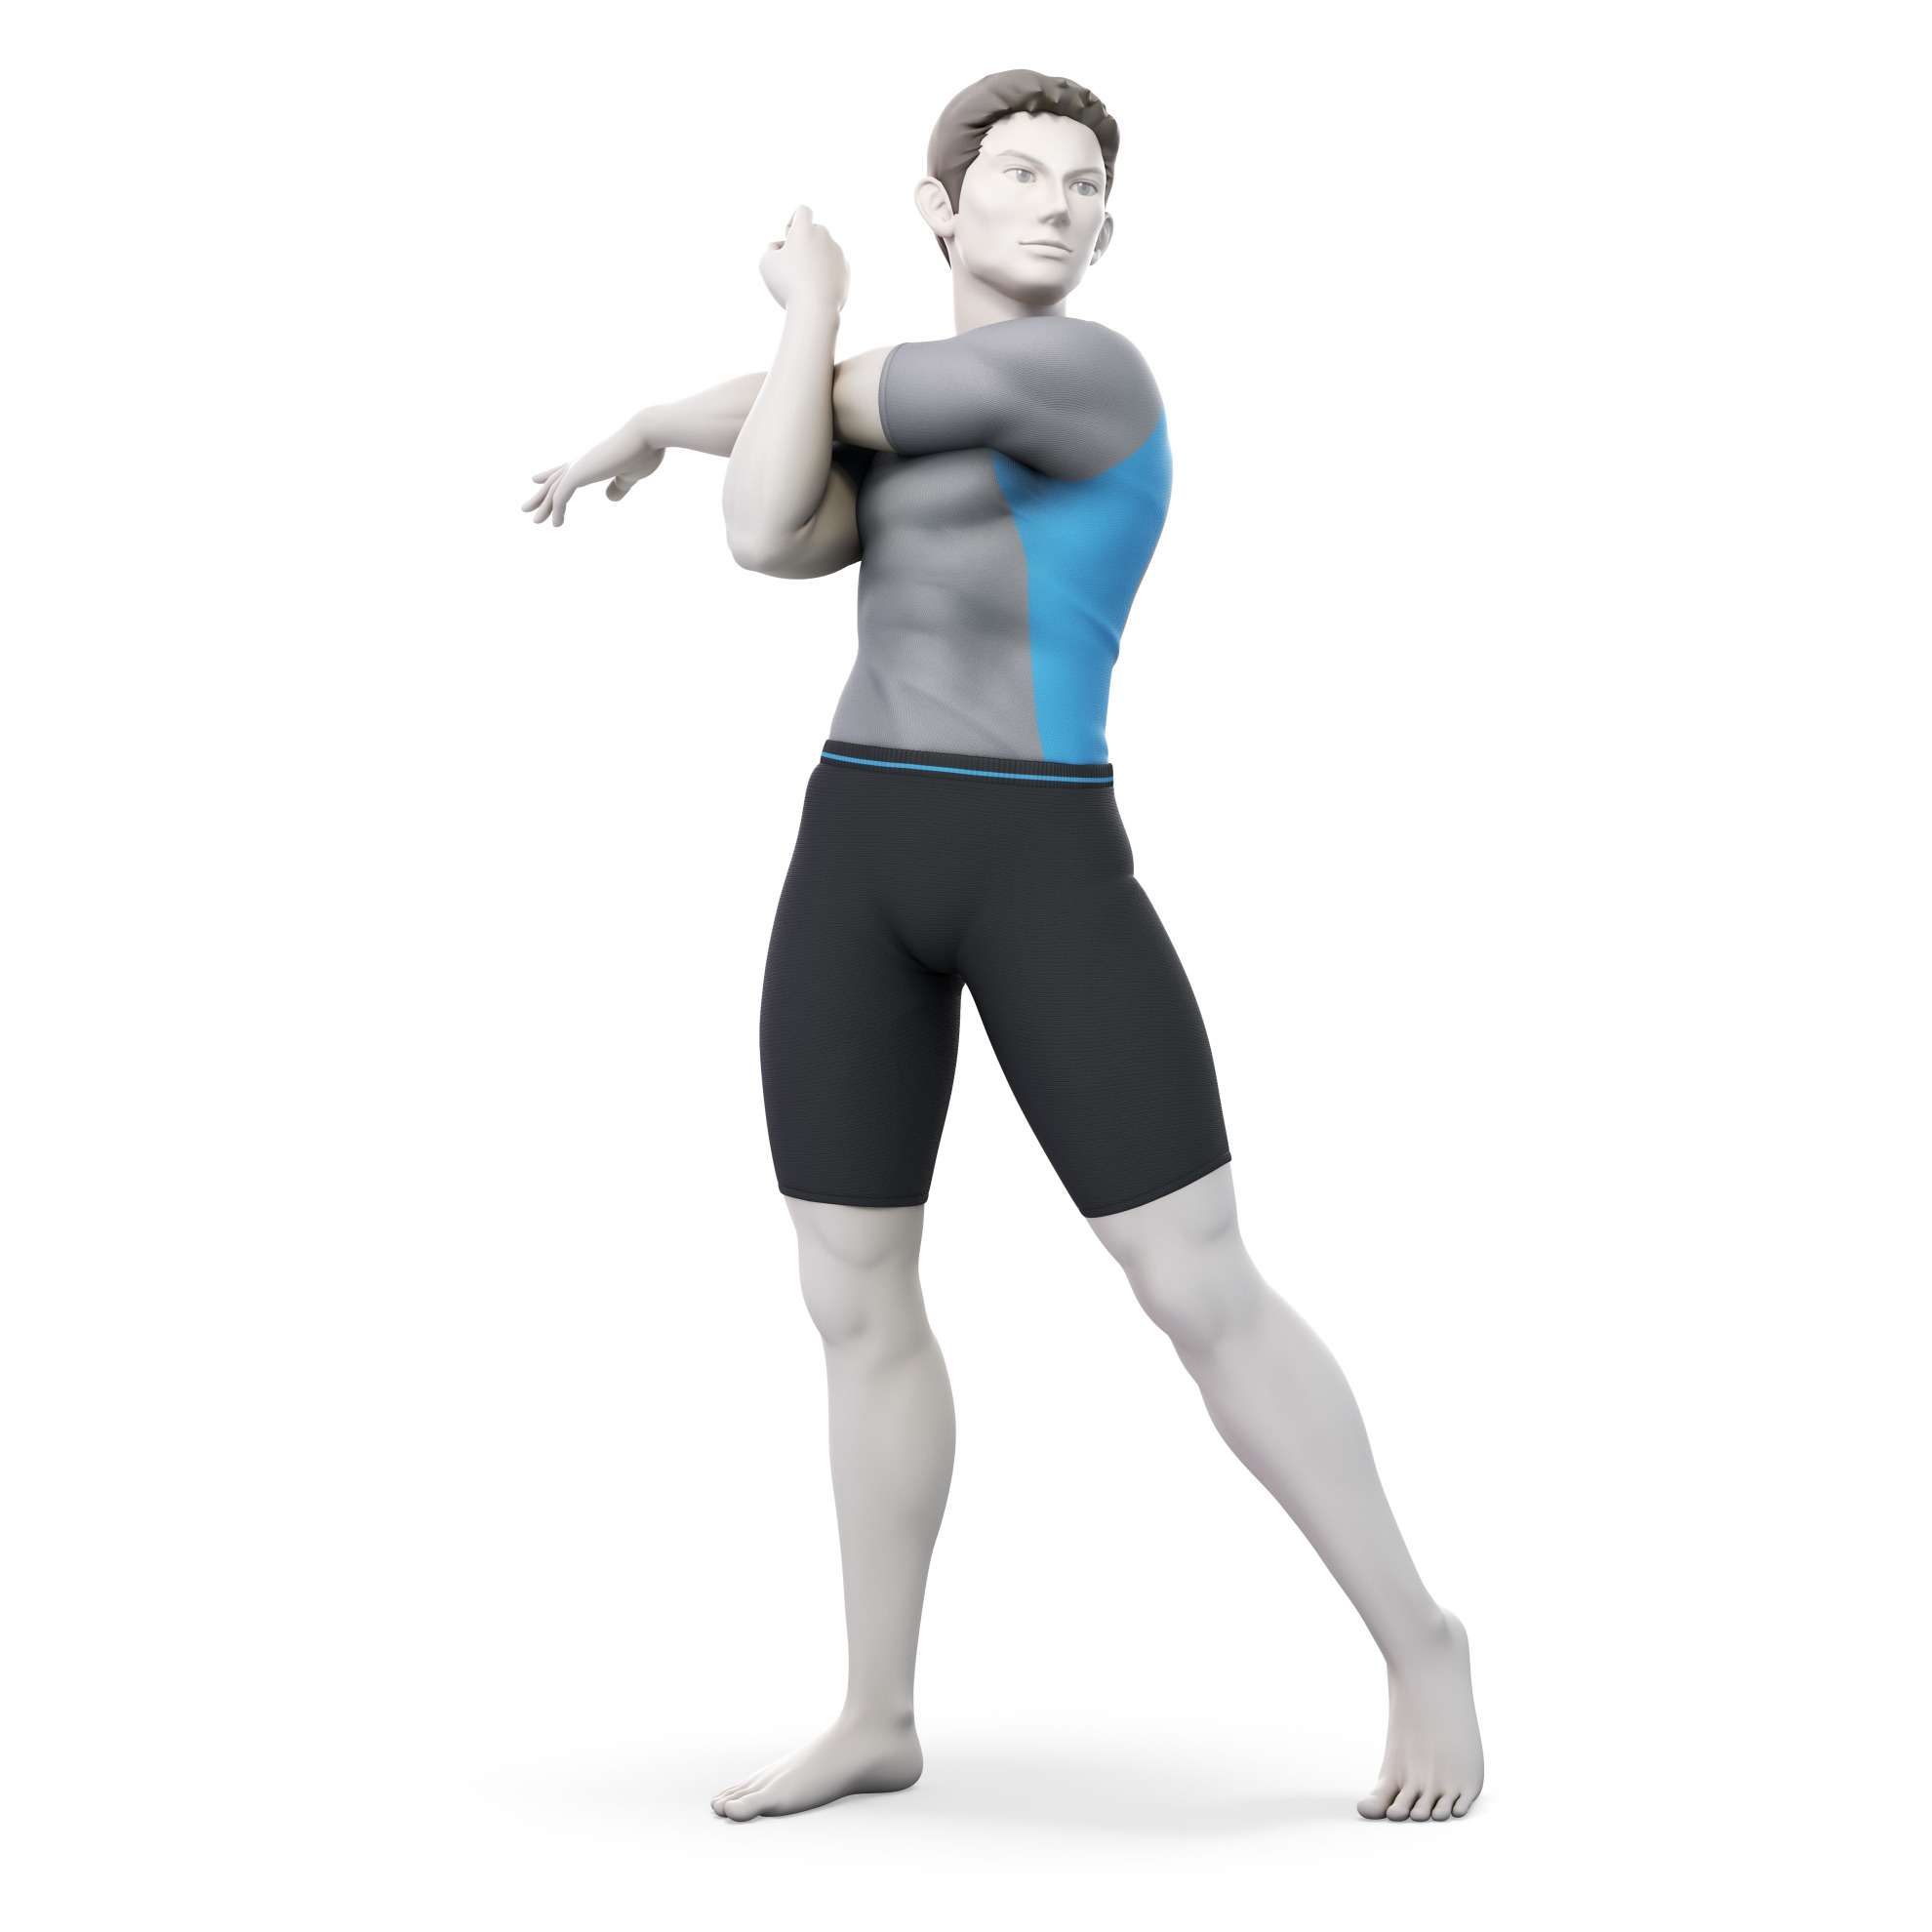 Male Wii Fit Trainer Super Smash Bros. Ultimate Character Render